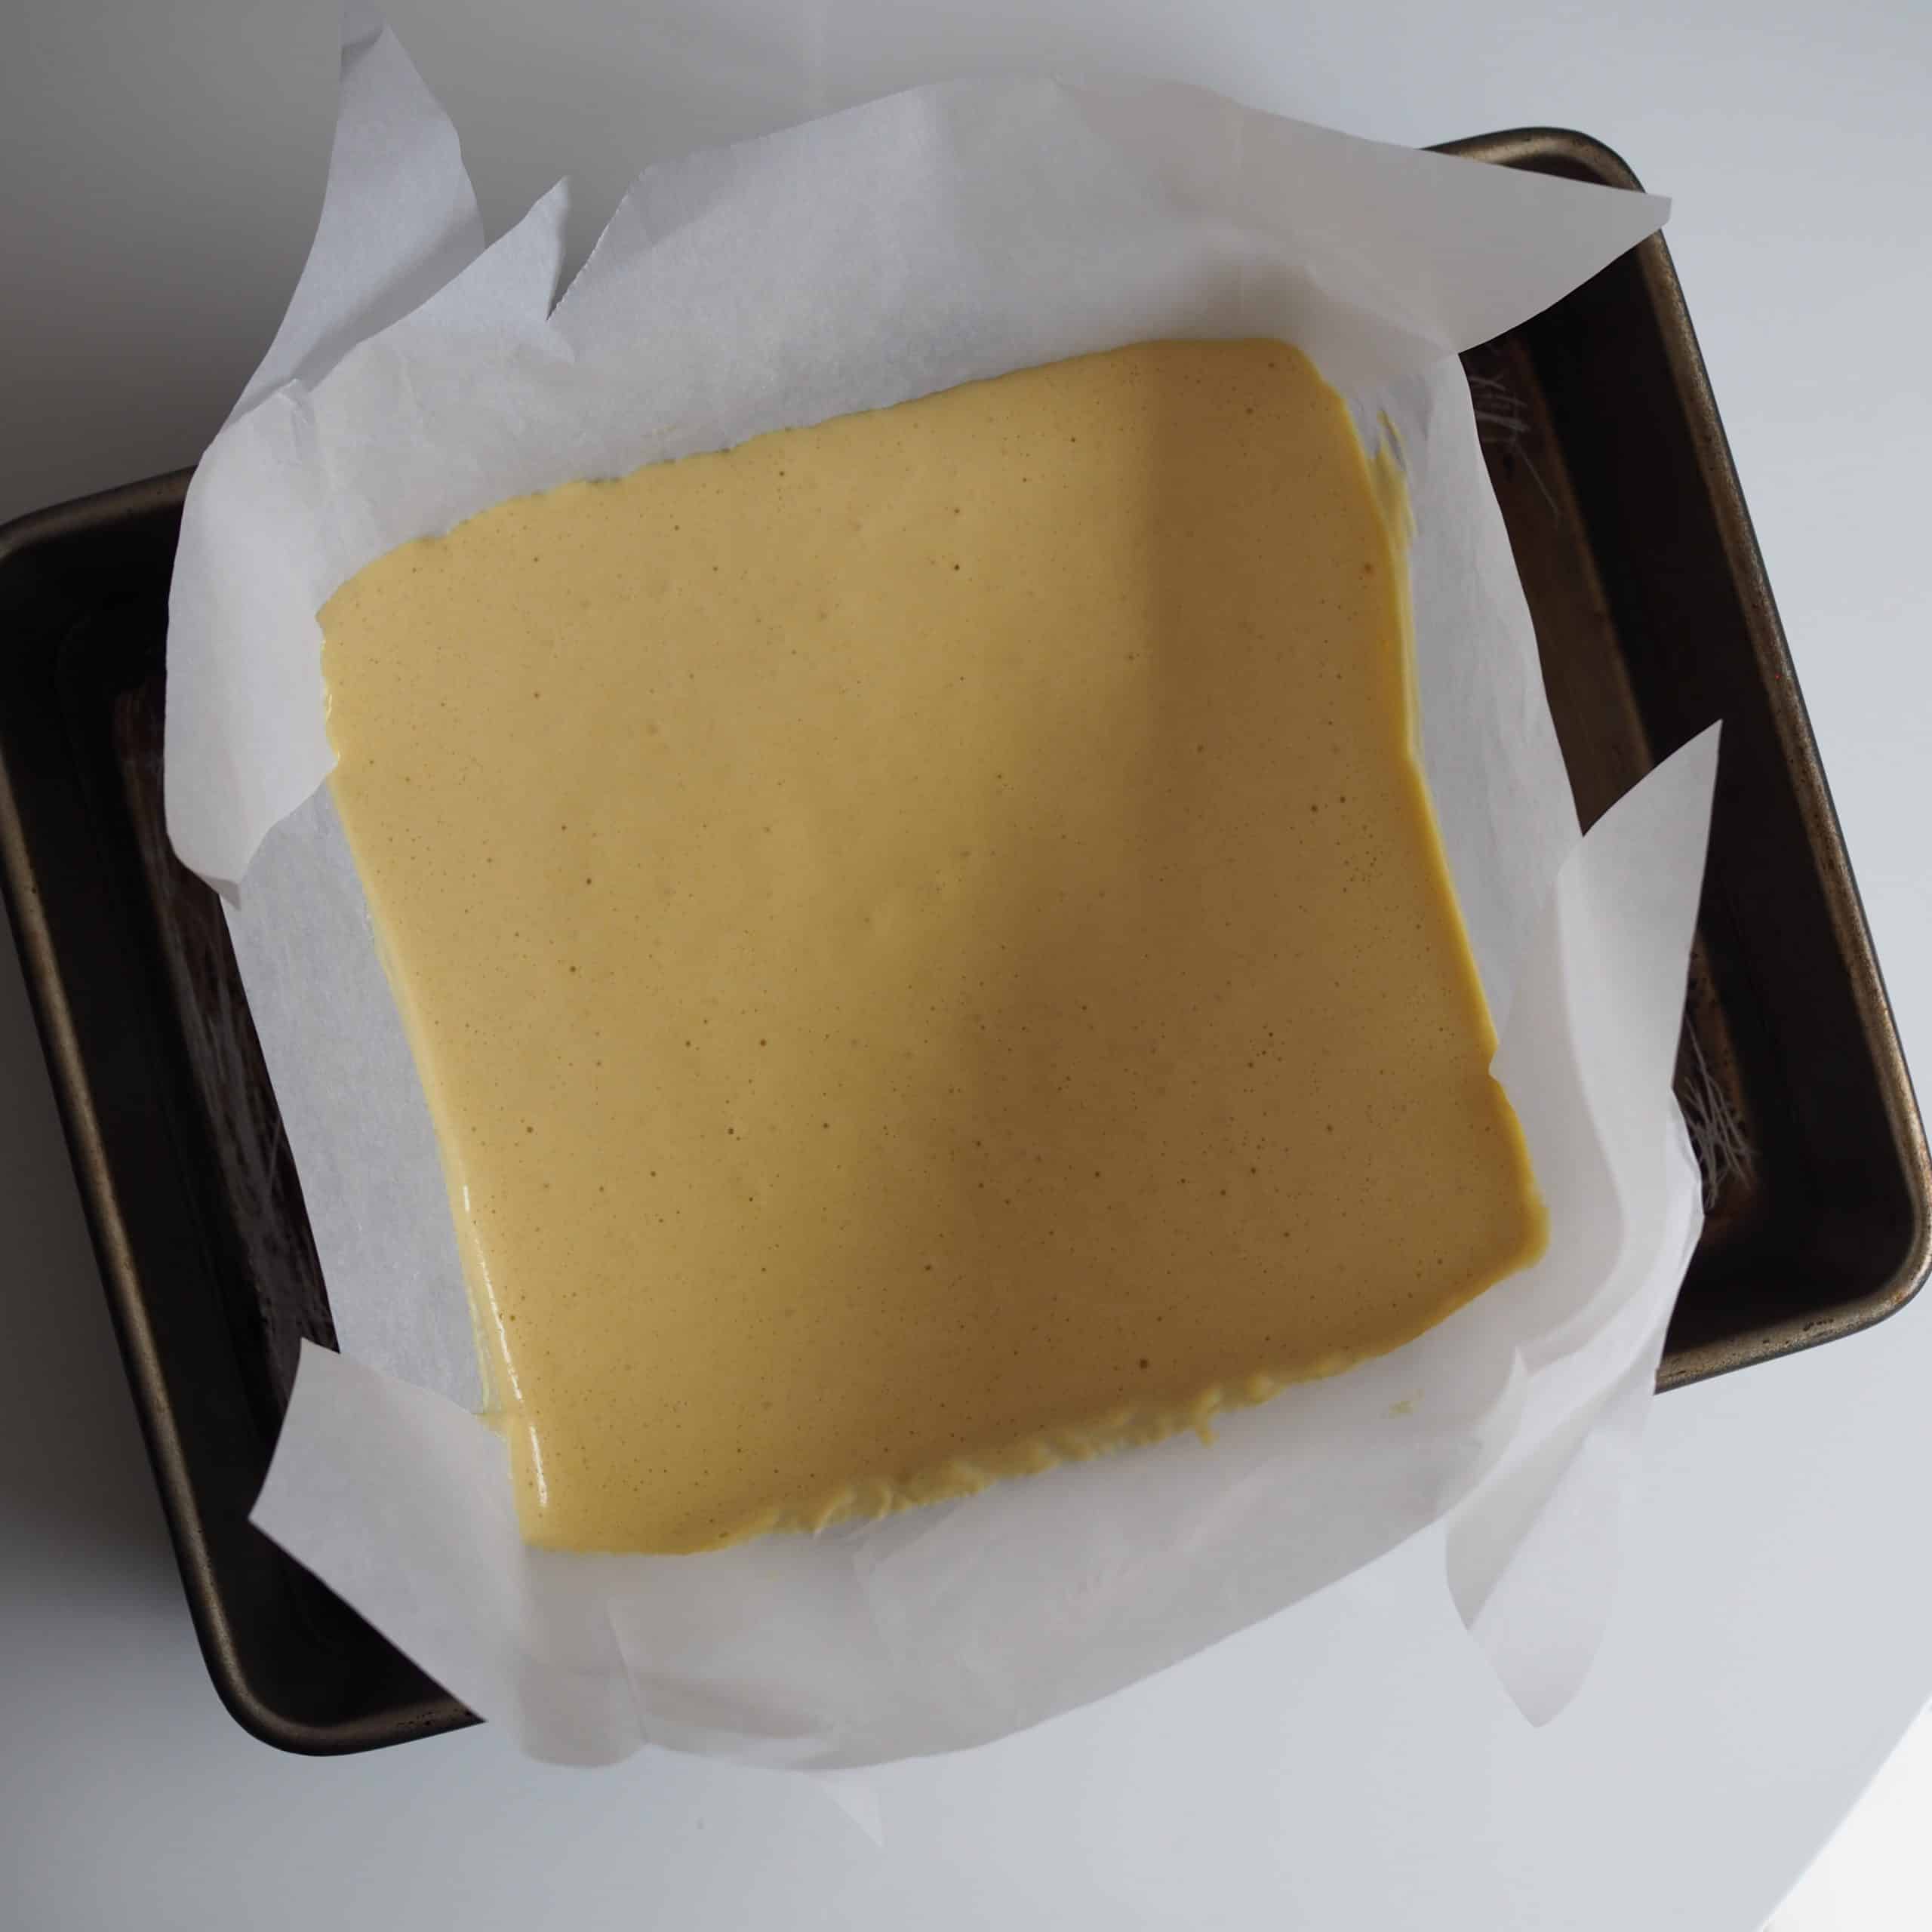 place square pan in a larger pan with dairy-free castella cake